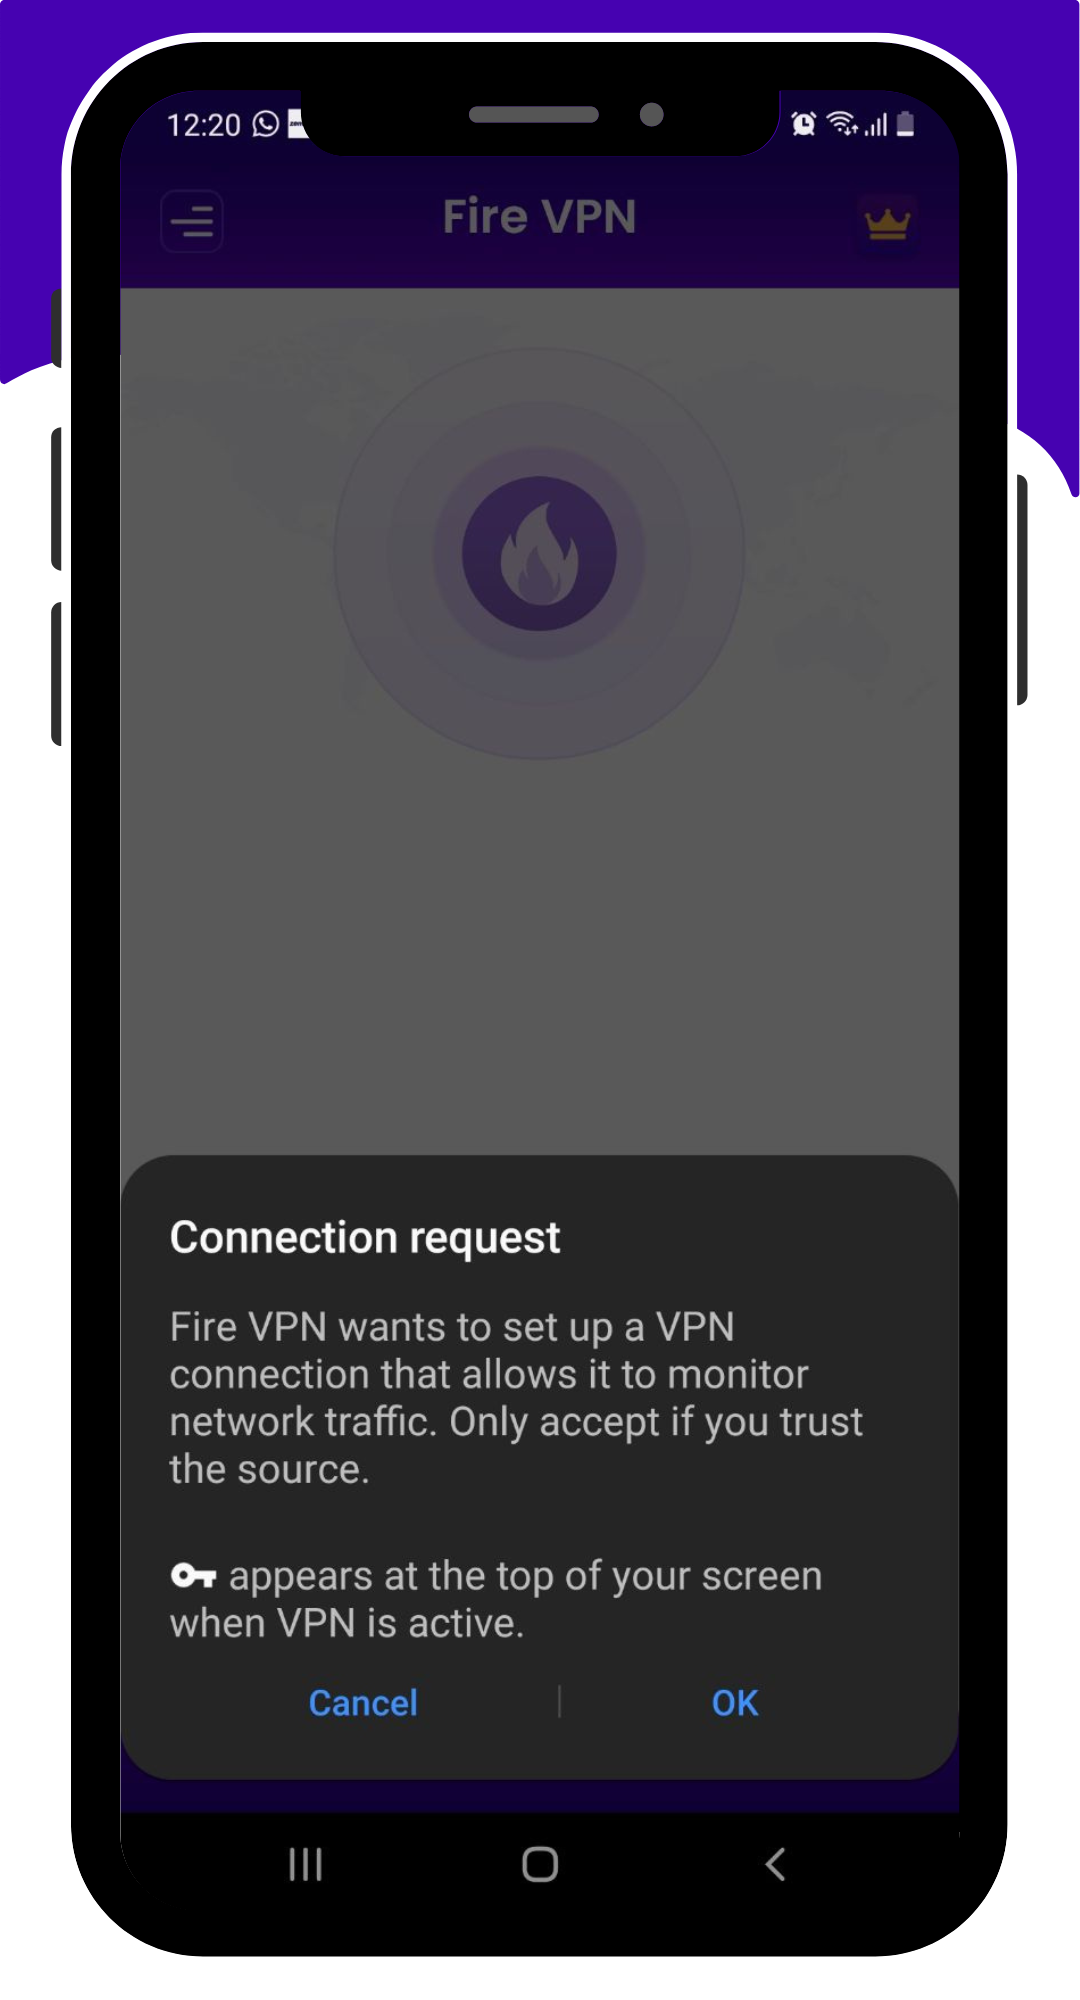 fire-vpn successfully-connected